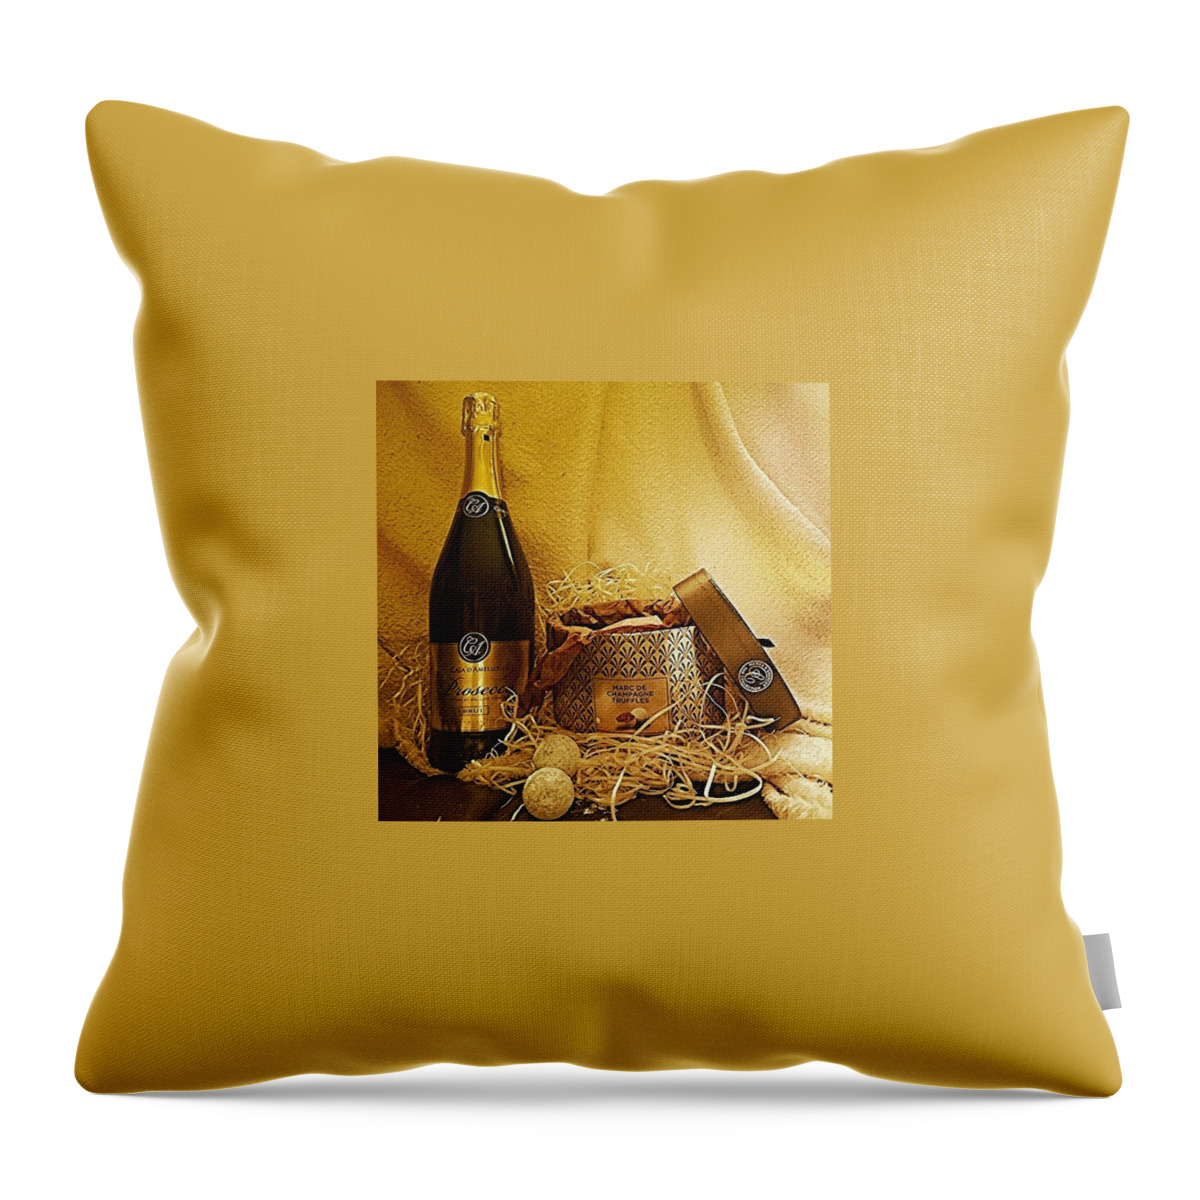  Throw Pillow featuring the photograph I Got Another Birthday Present by Abbie Shores